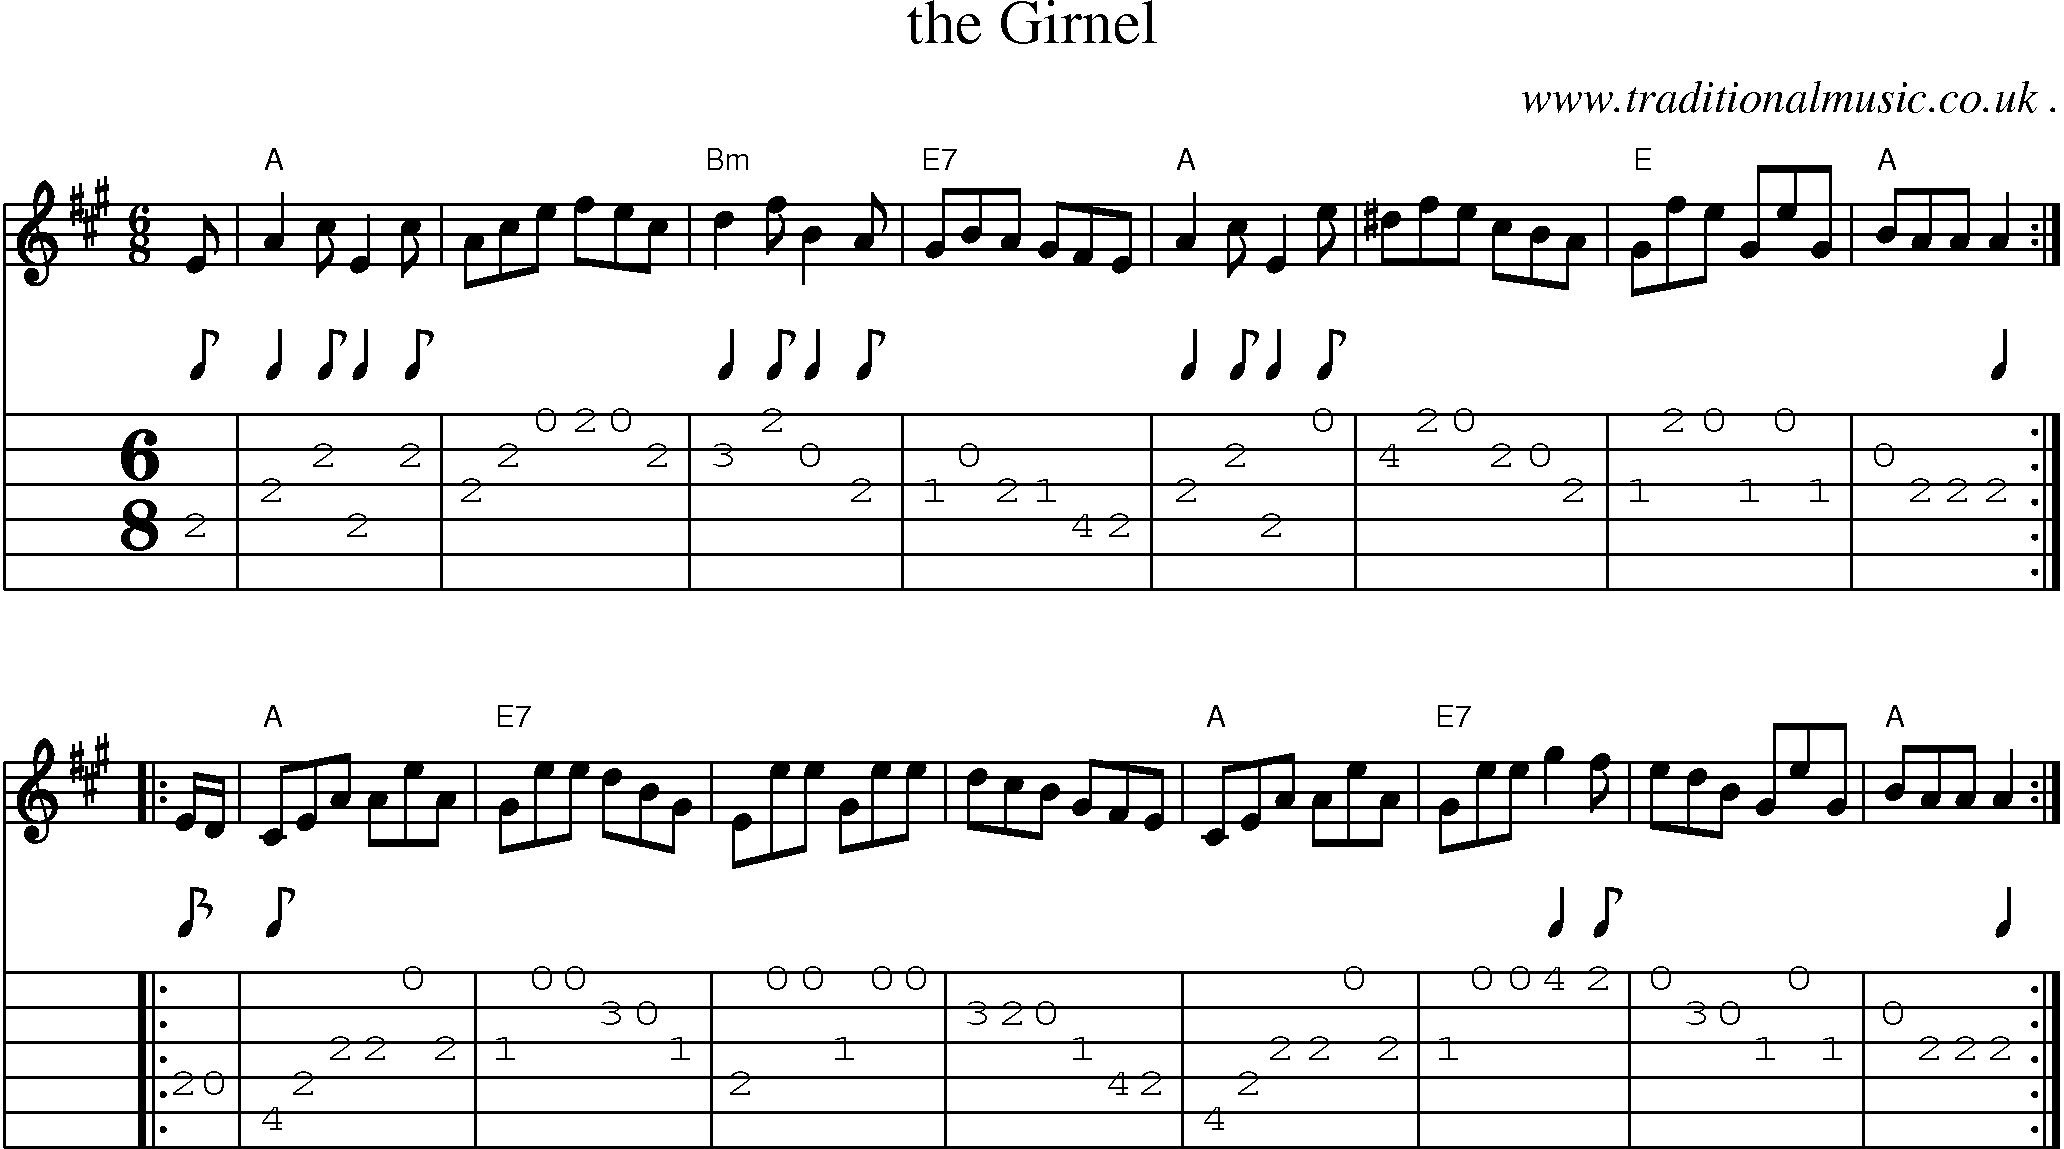 Sheet-music  score, Chords and Guitar Tabs for The Girnel